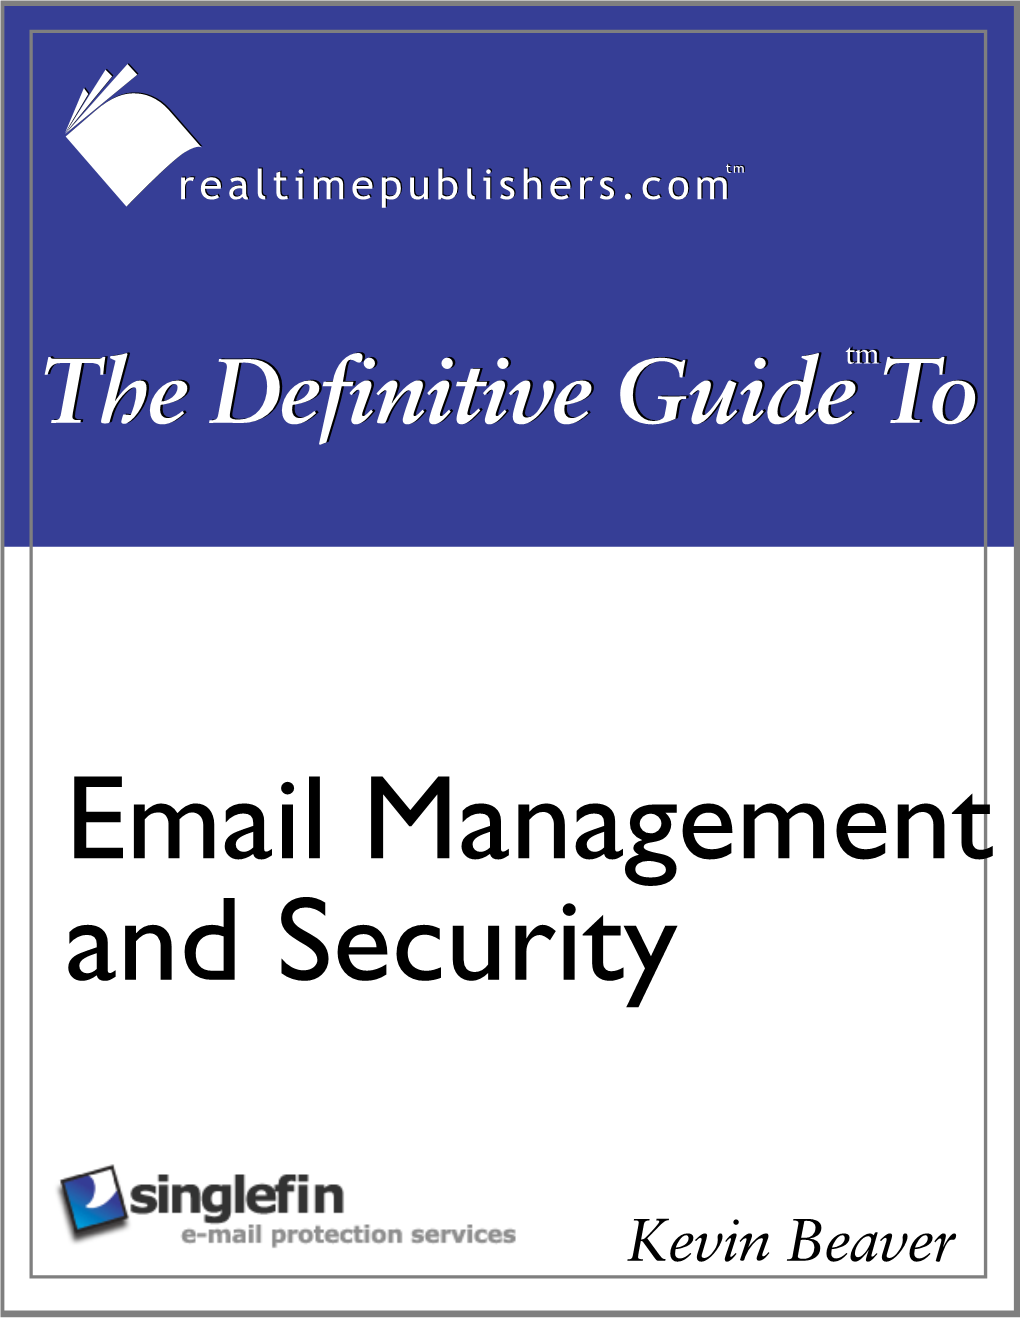 The Definitive Guide to Email Management and Security